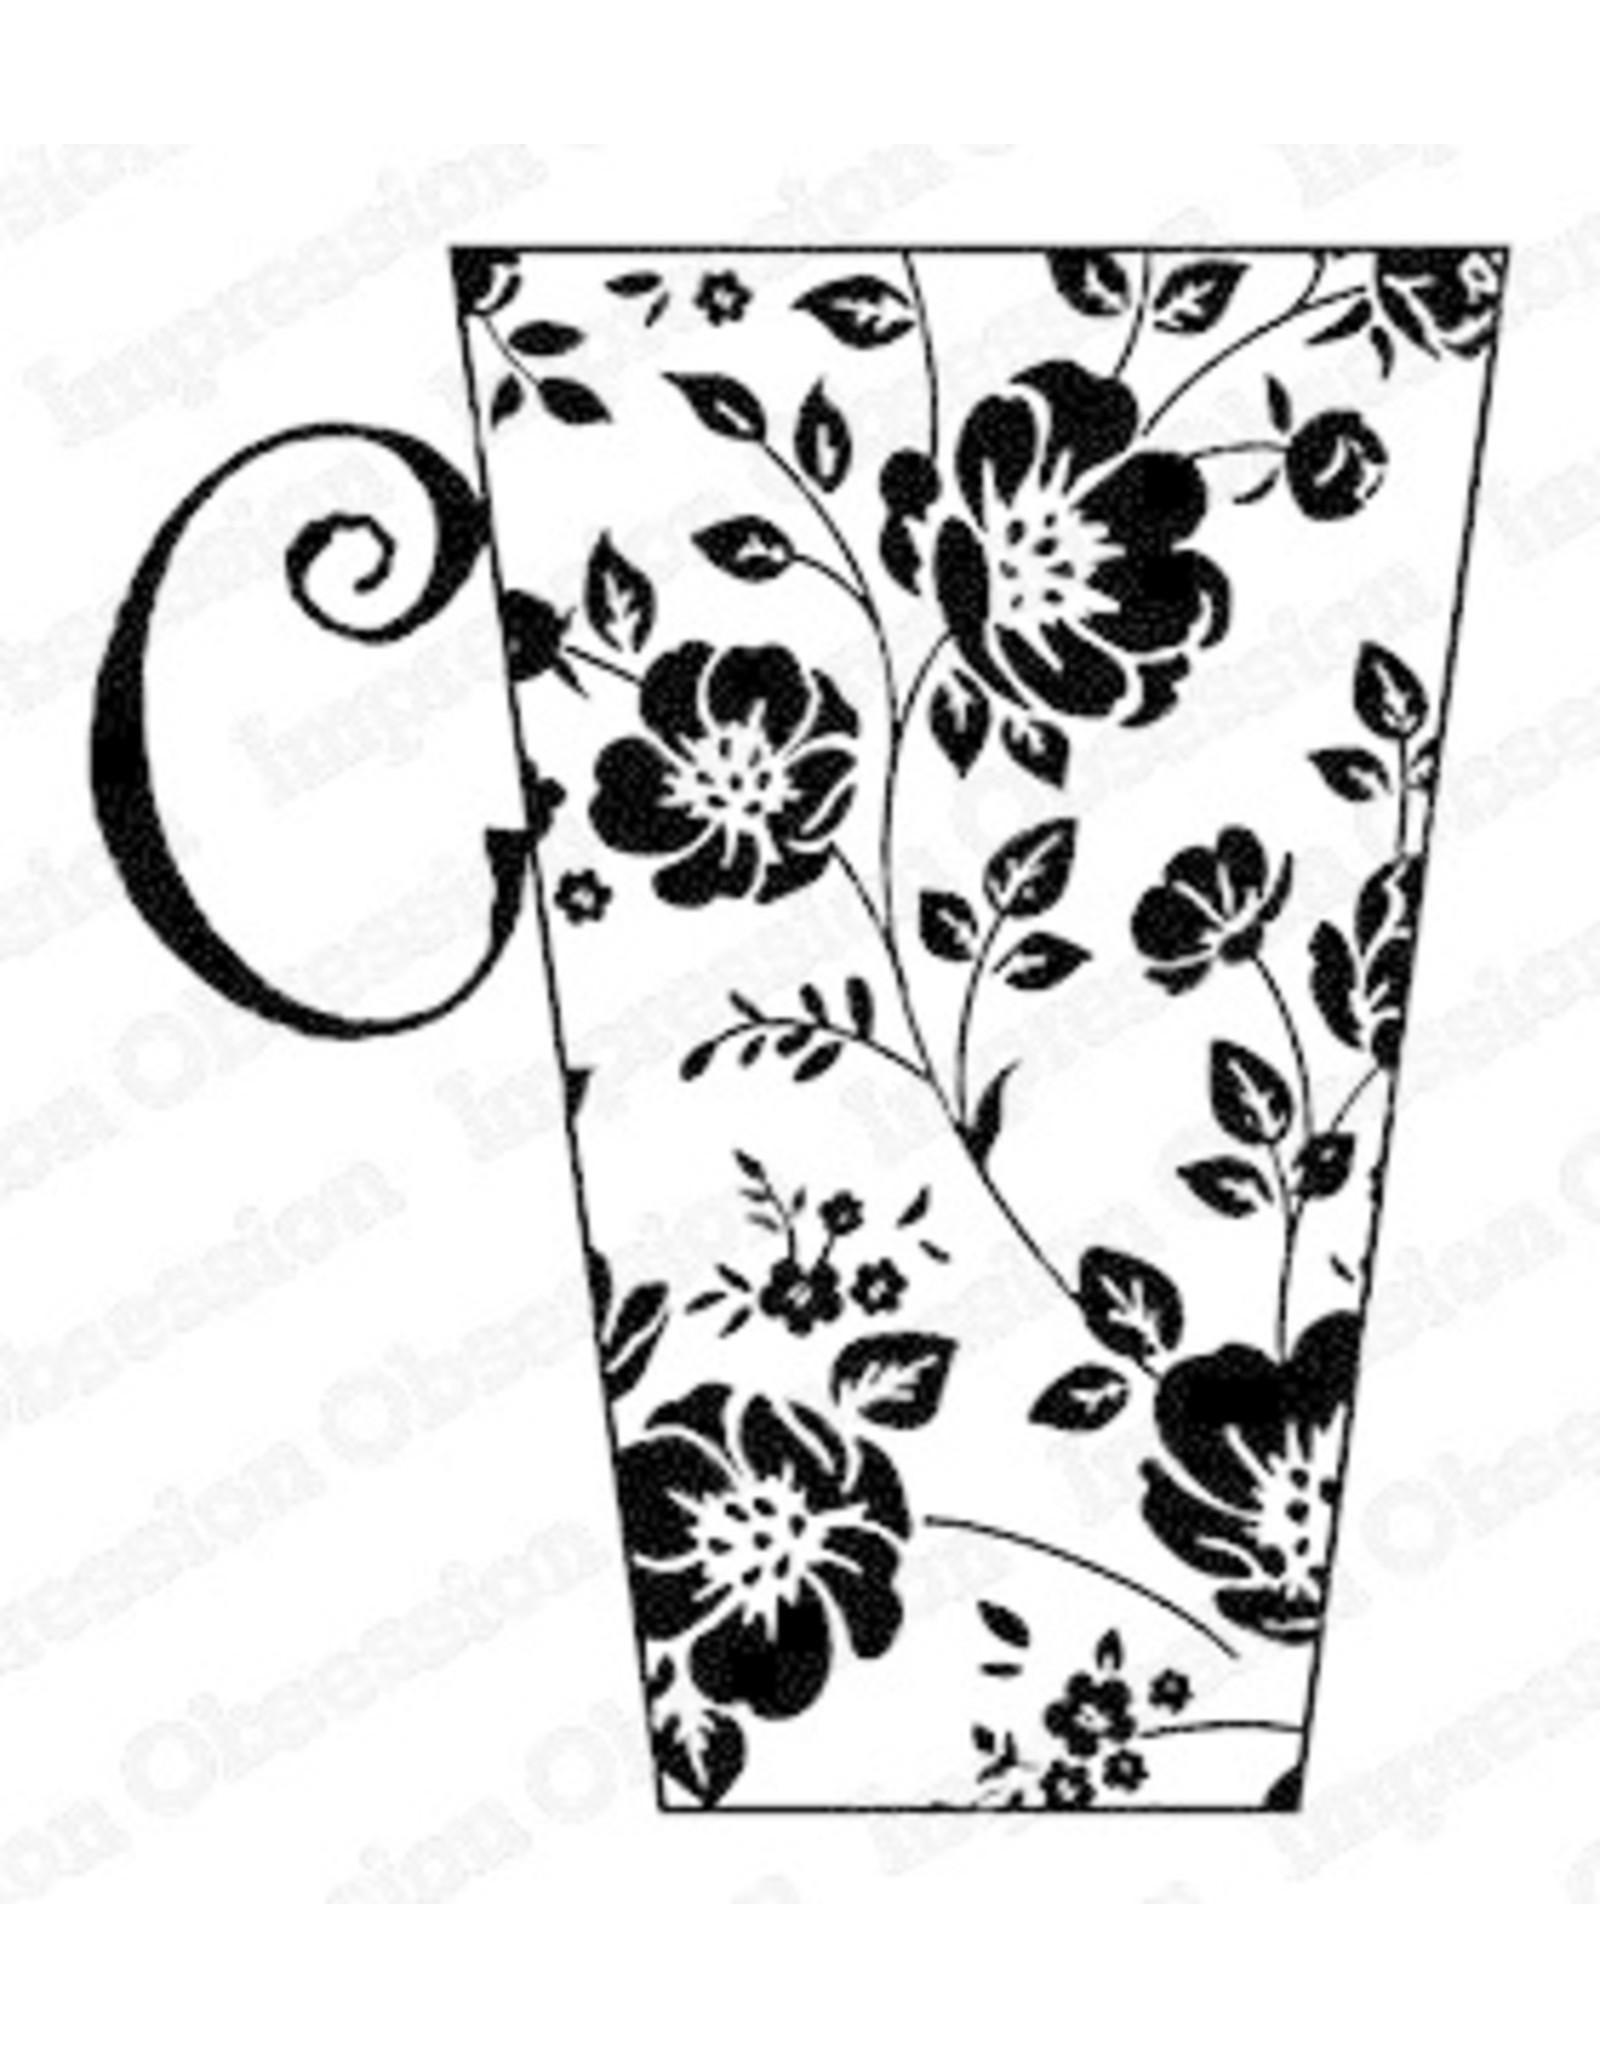 Impression Obsession Peony Print Cup CLING Stamps